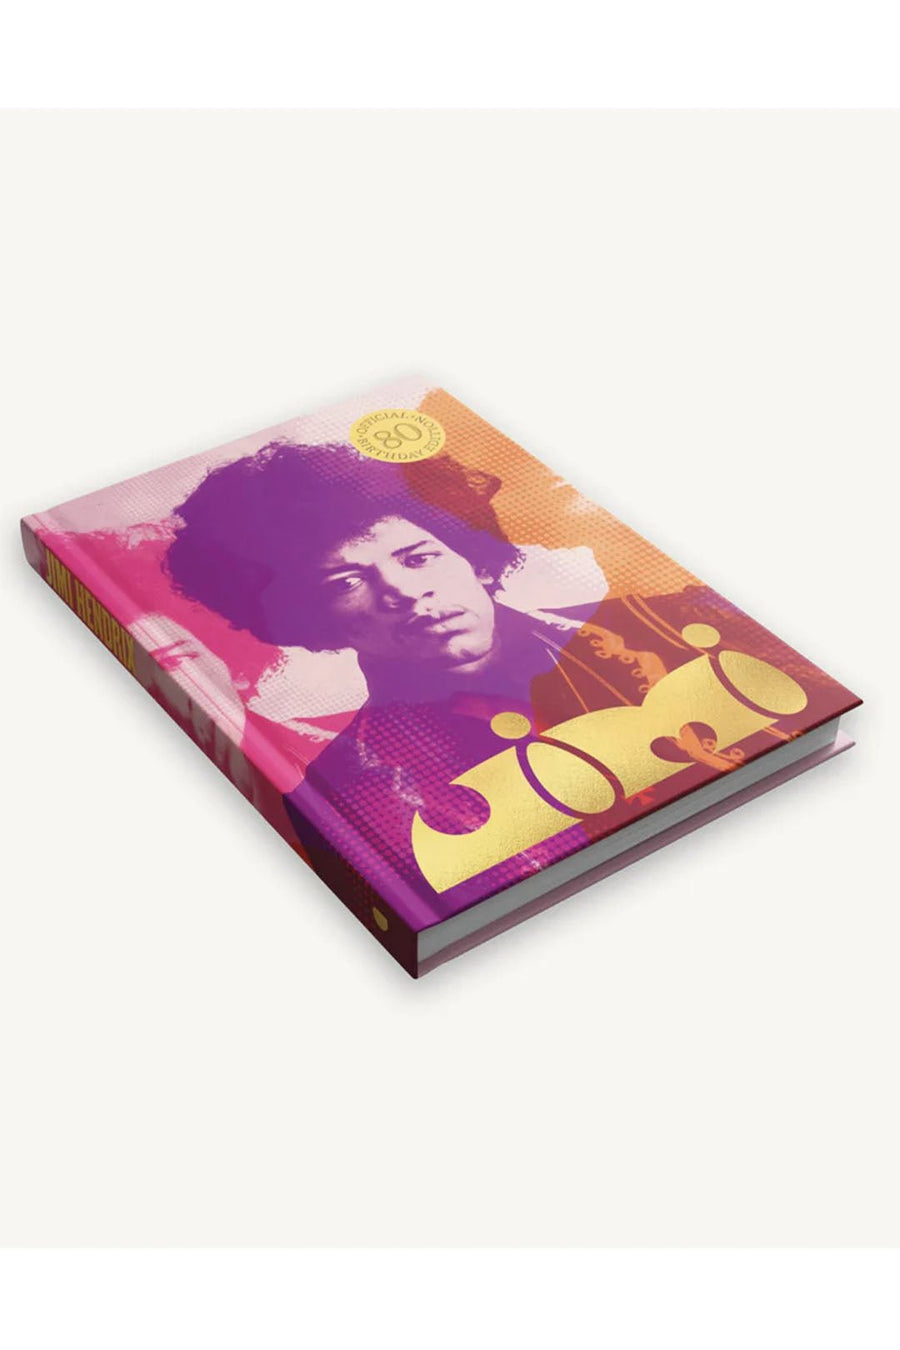 JIMI - Burning Torch Online Boutique